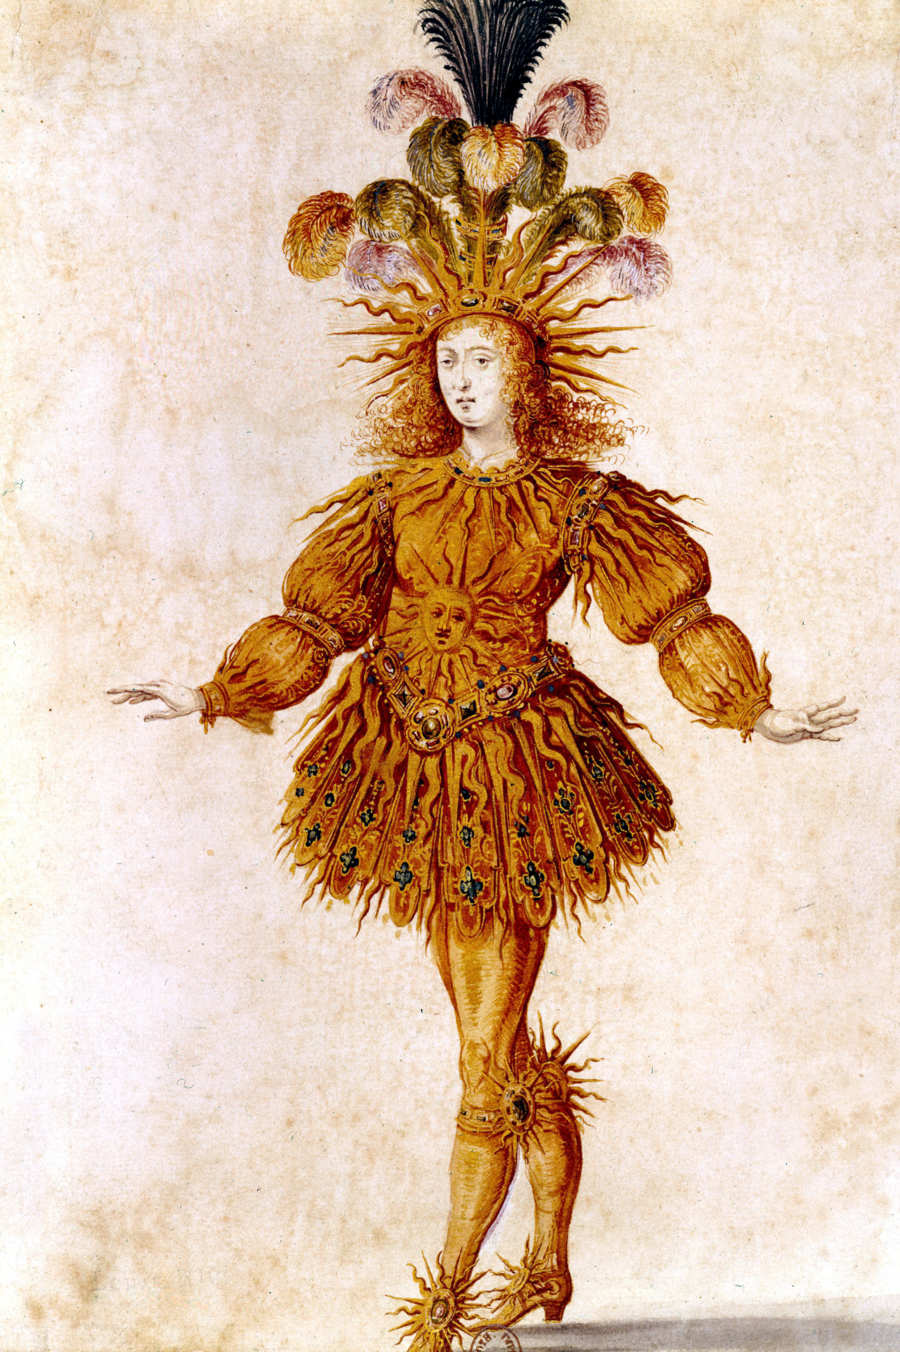 Men in Tights and Tutus: The Decadence of the Sun King's Male Ballets